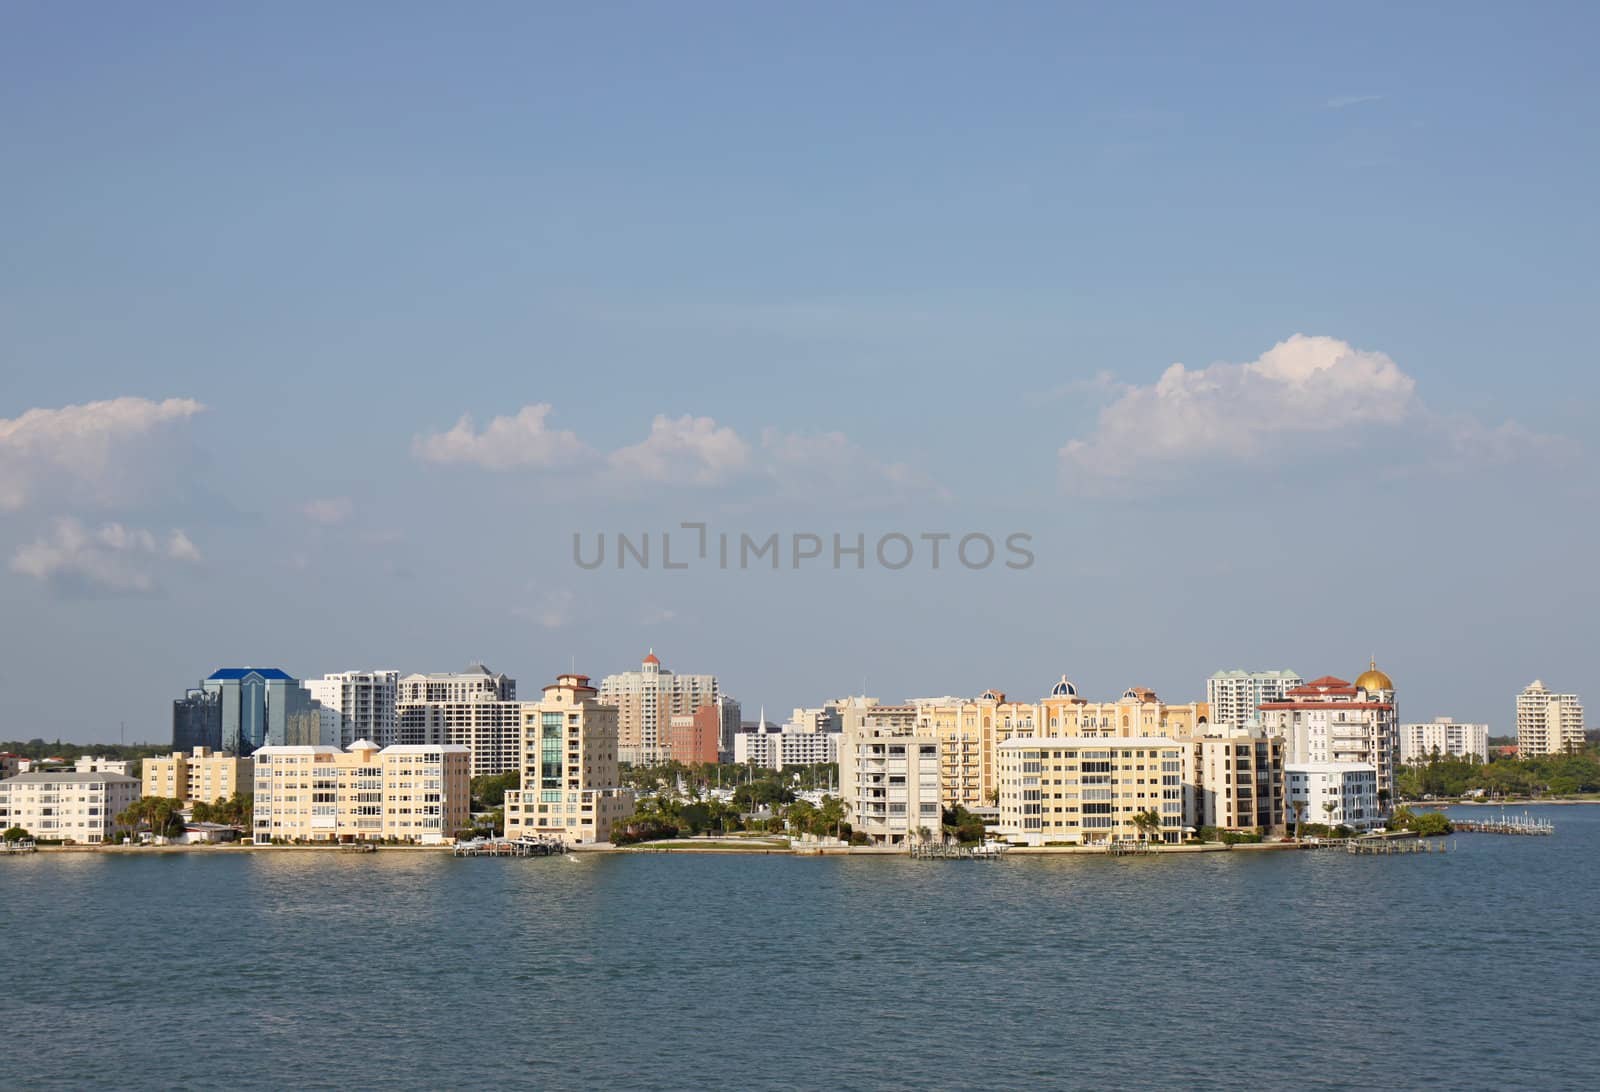 Skyline of Sarasota, Florida, viewed from above the water by sgoodwin4813